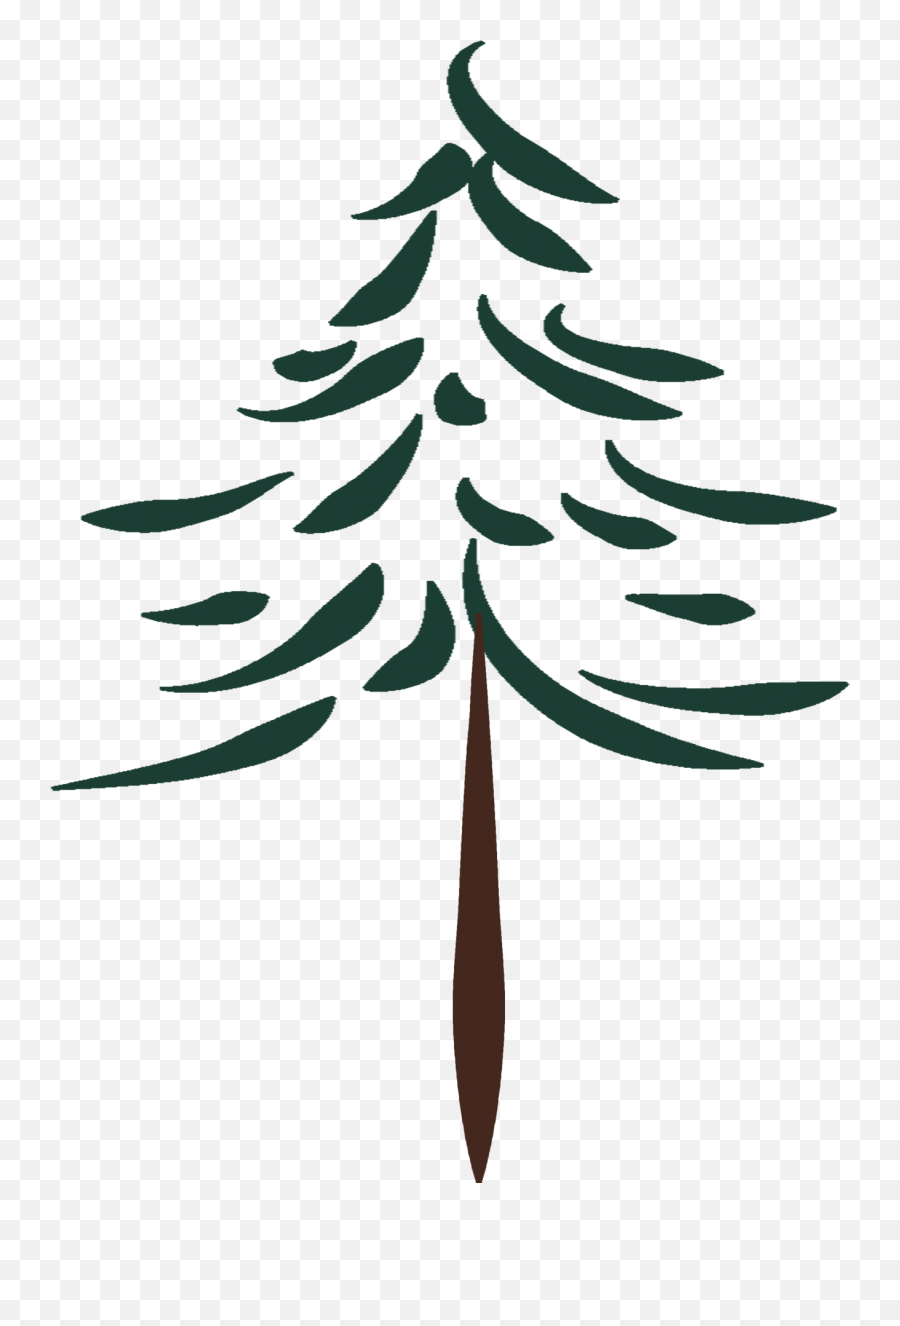 Tall Pine Tree Png - Pine,Tall Tree Png